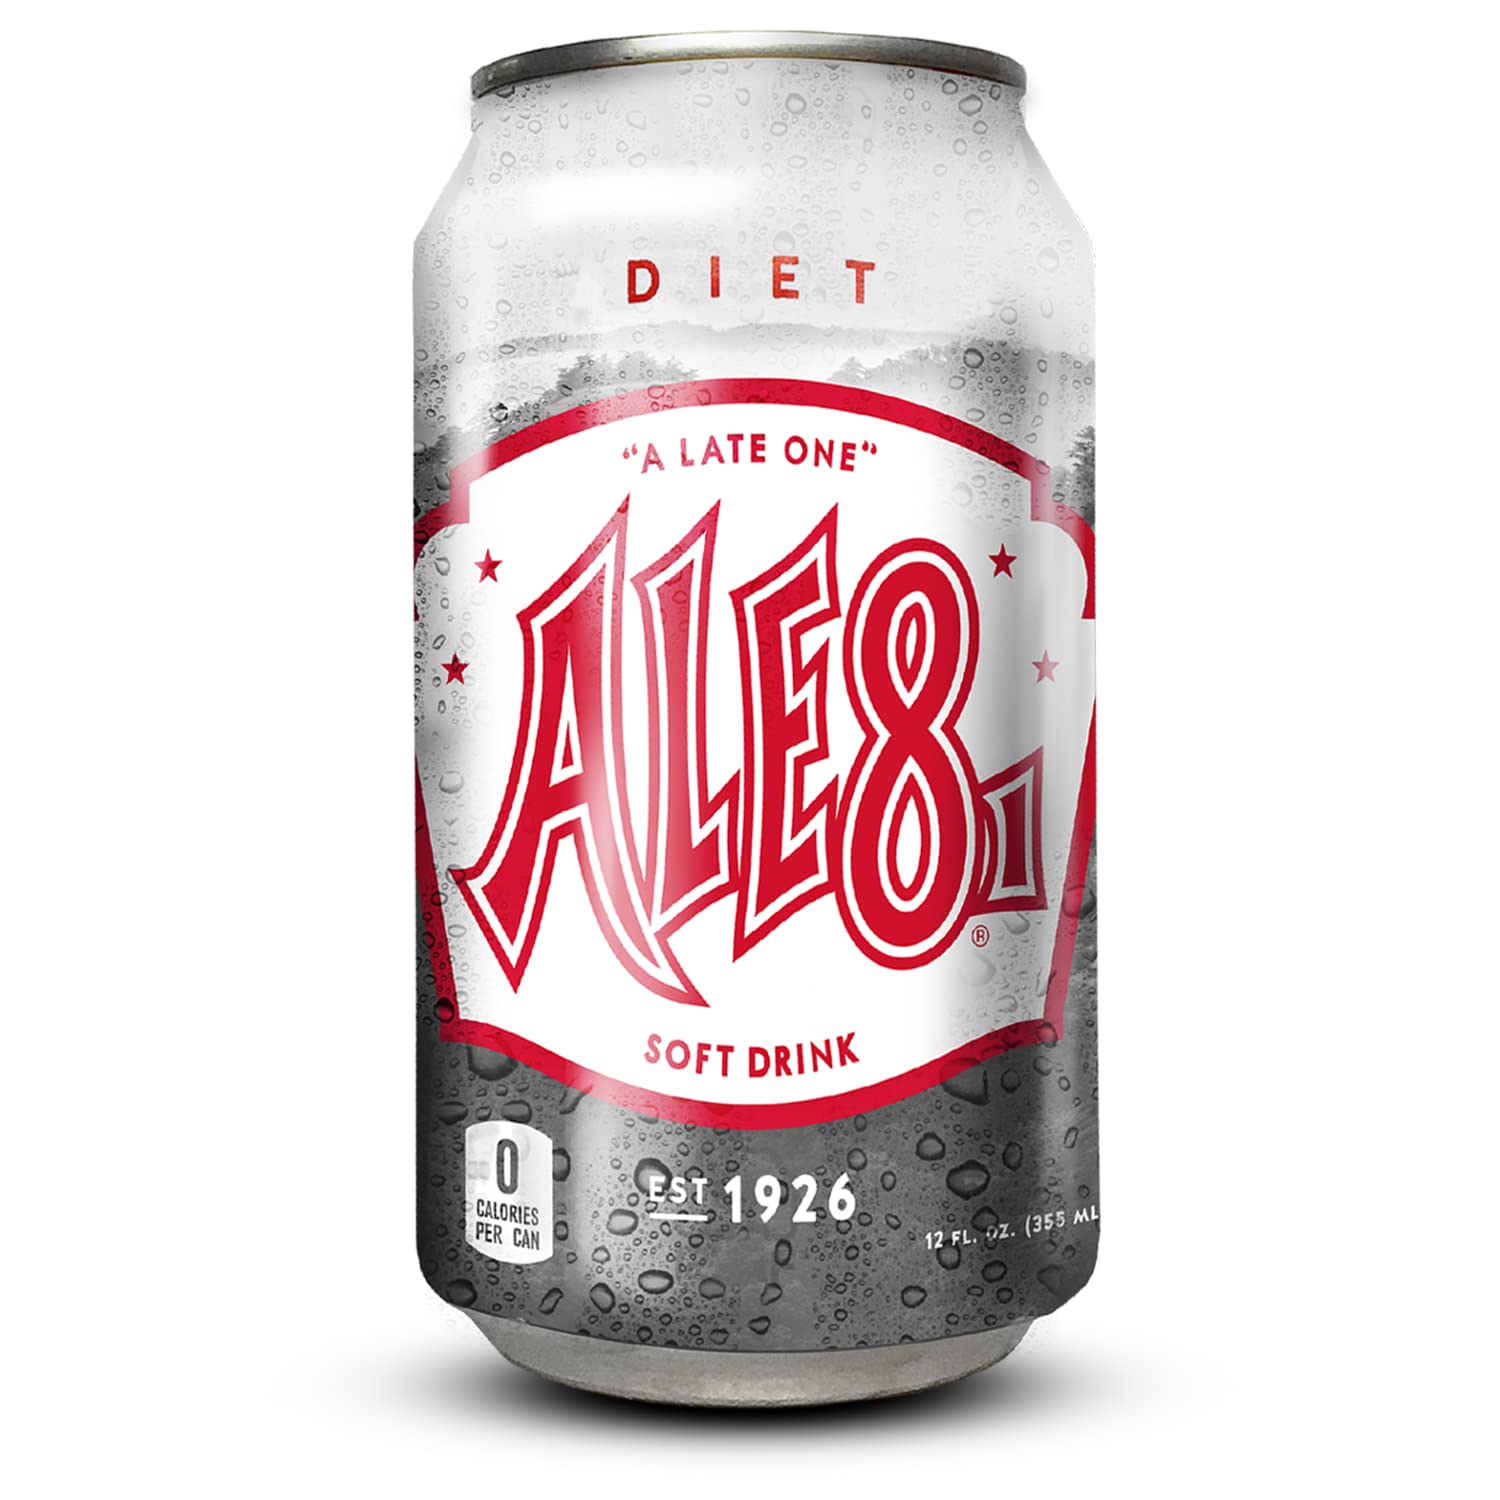 Ale 8 One Ginger Ale Soda with a Caffeine Kick & Hint of Citrus - Original Flavor - Zero Sugar - 12 Pack, Case of 12 Oz Cans - Sugar Free Ginger Soft Drink, Pack of 12 - image 1 of 6